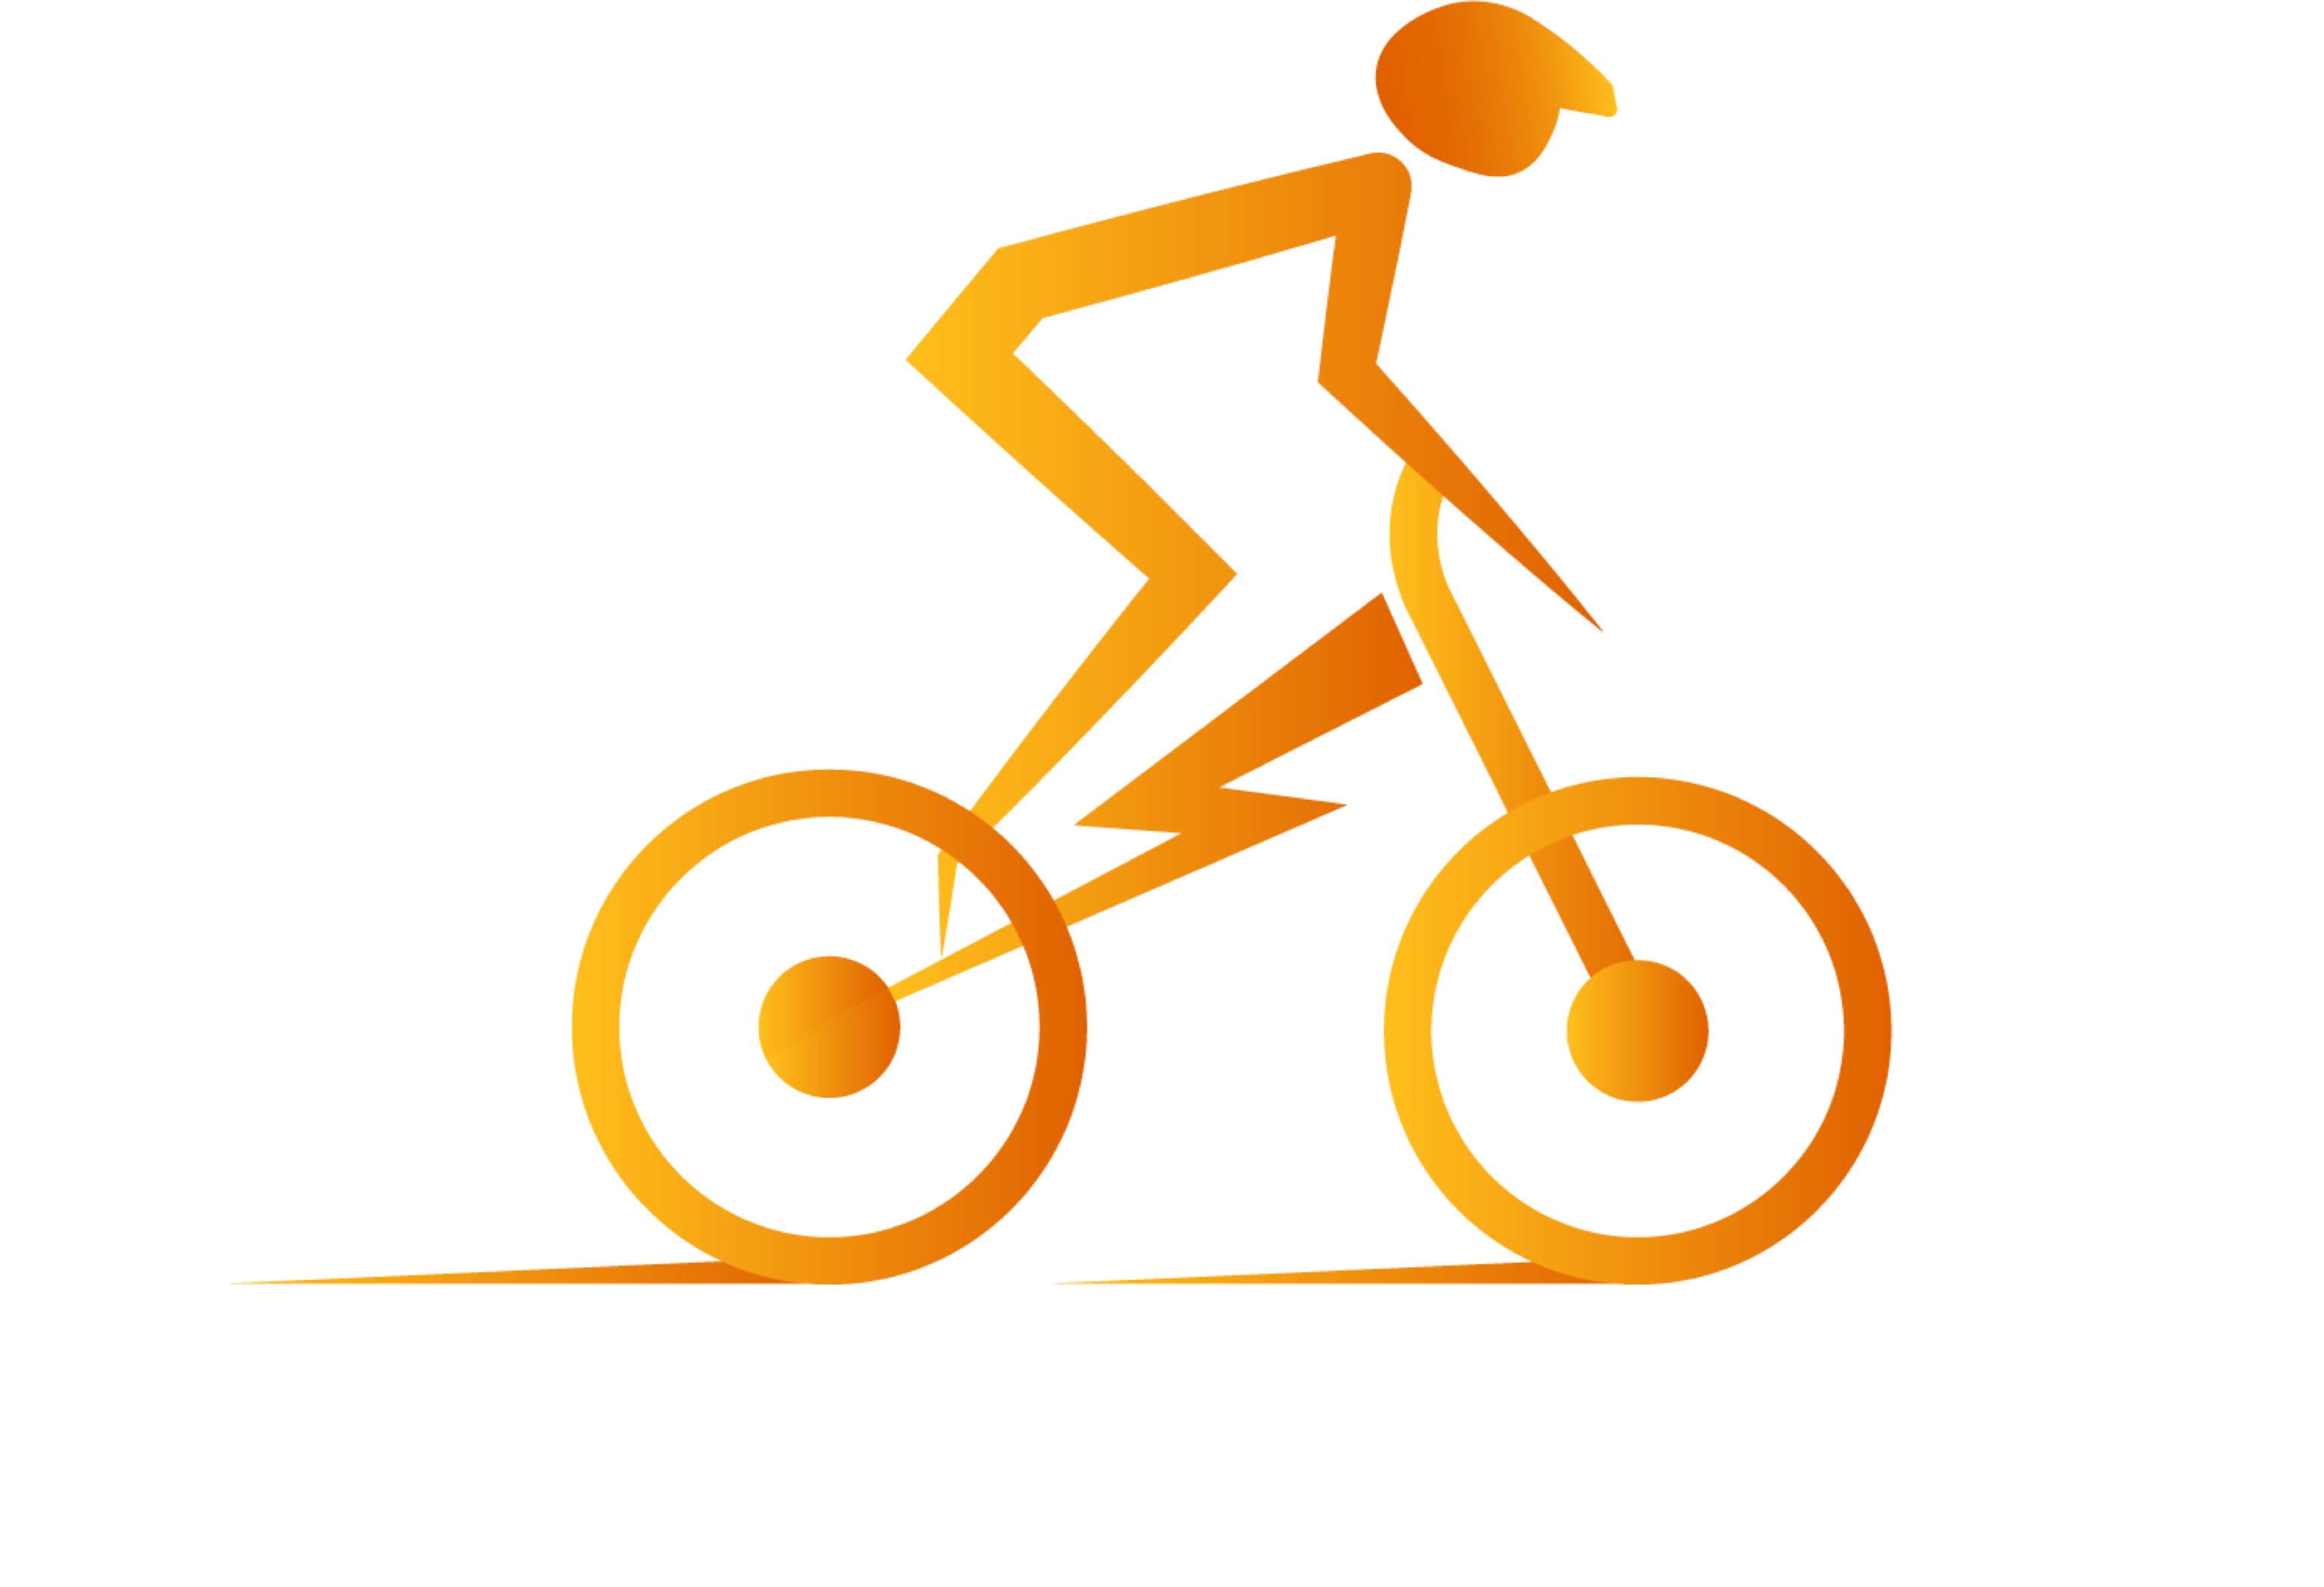 Premium Vector | Electric bicycle logo design on black and white background